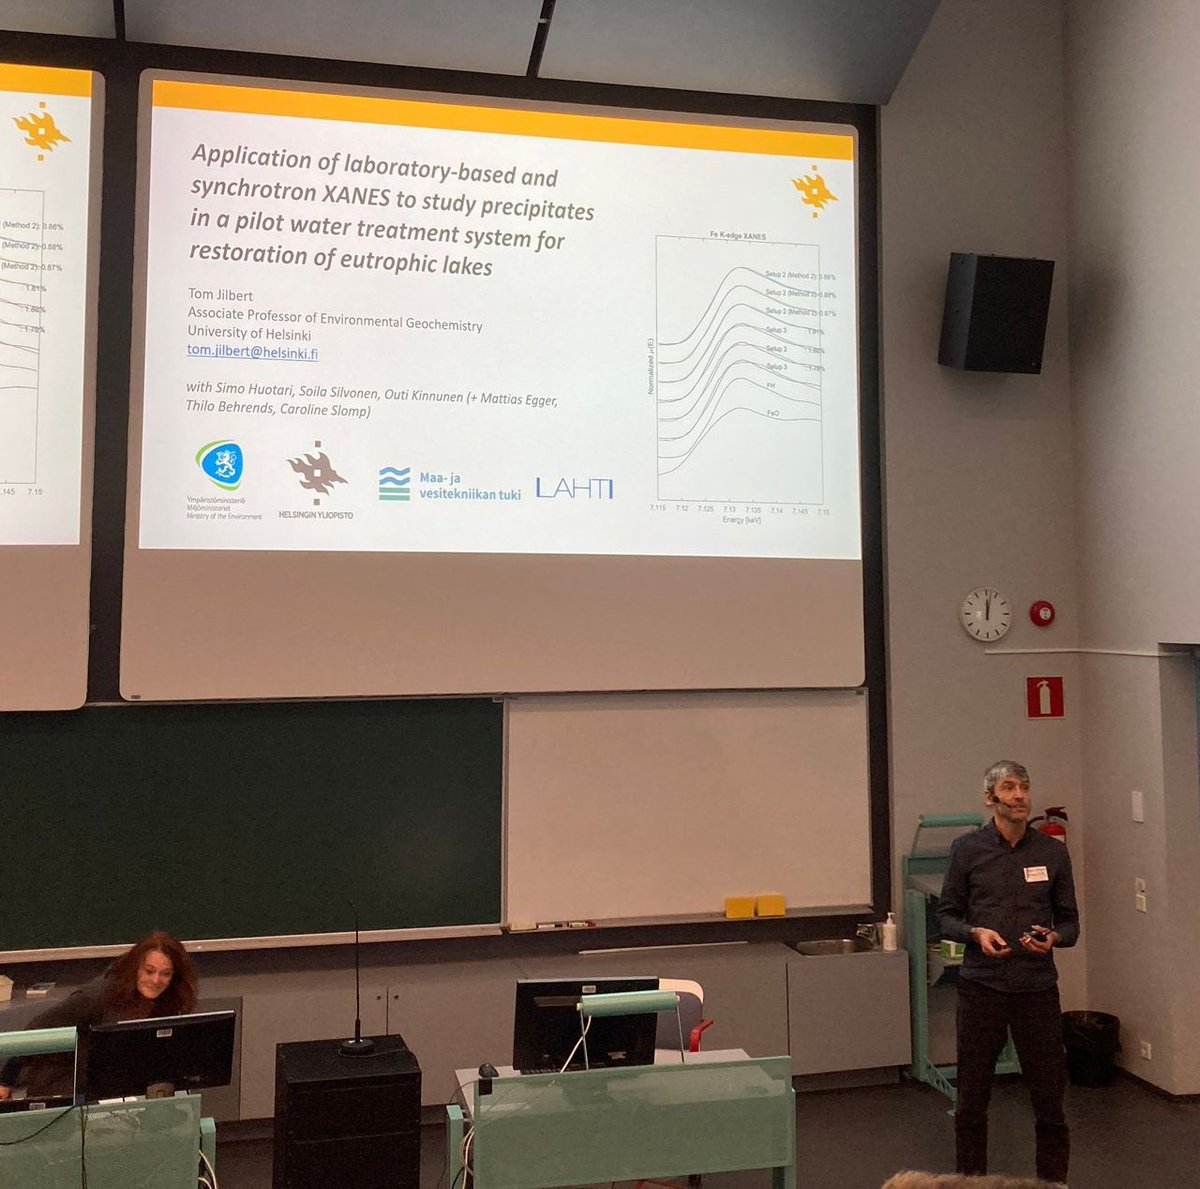 Our @KumpulaScience Center for @xspectroscopy organized a great workshop on lab-scale #XAS techniques. Thanks for the invite to present our work on coupled Fe-P dynamics in #lakerestoration applications (also showed some archive Baltic sediment data 😀 @CarolineSlomp @oceanegger)